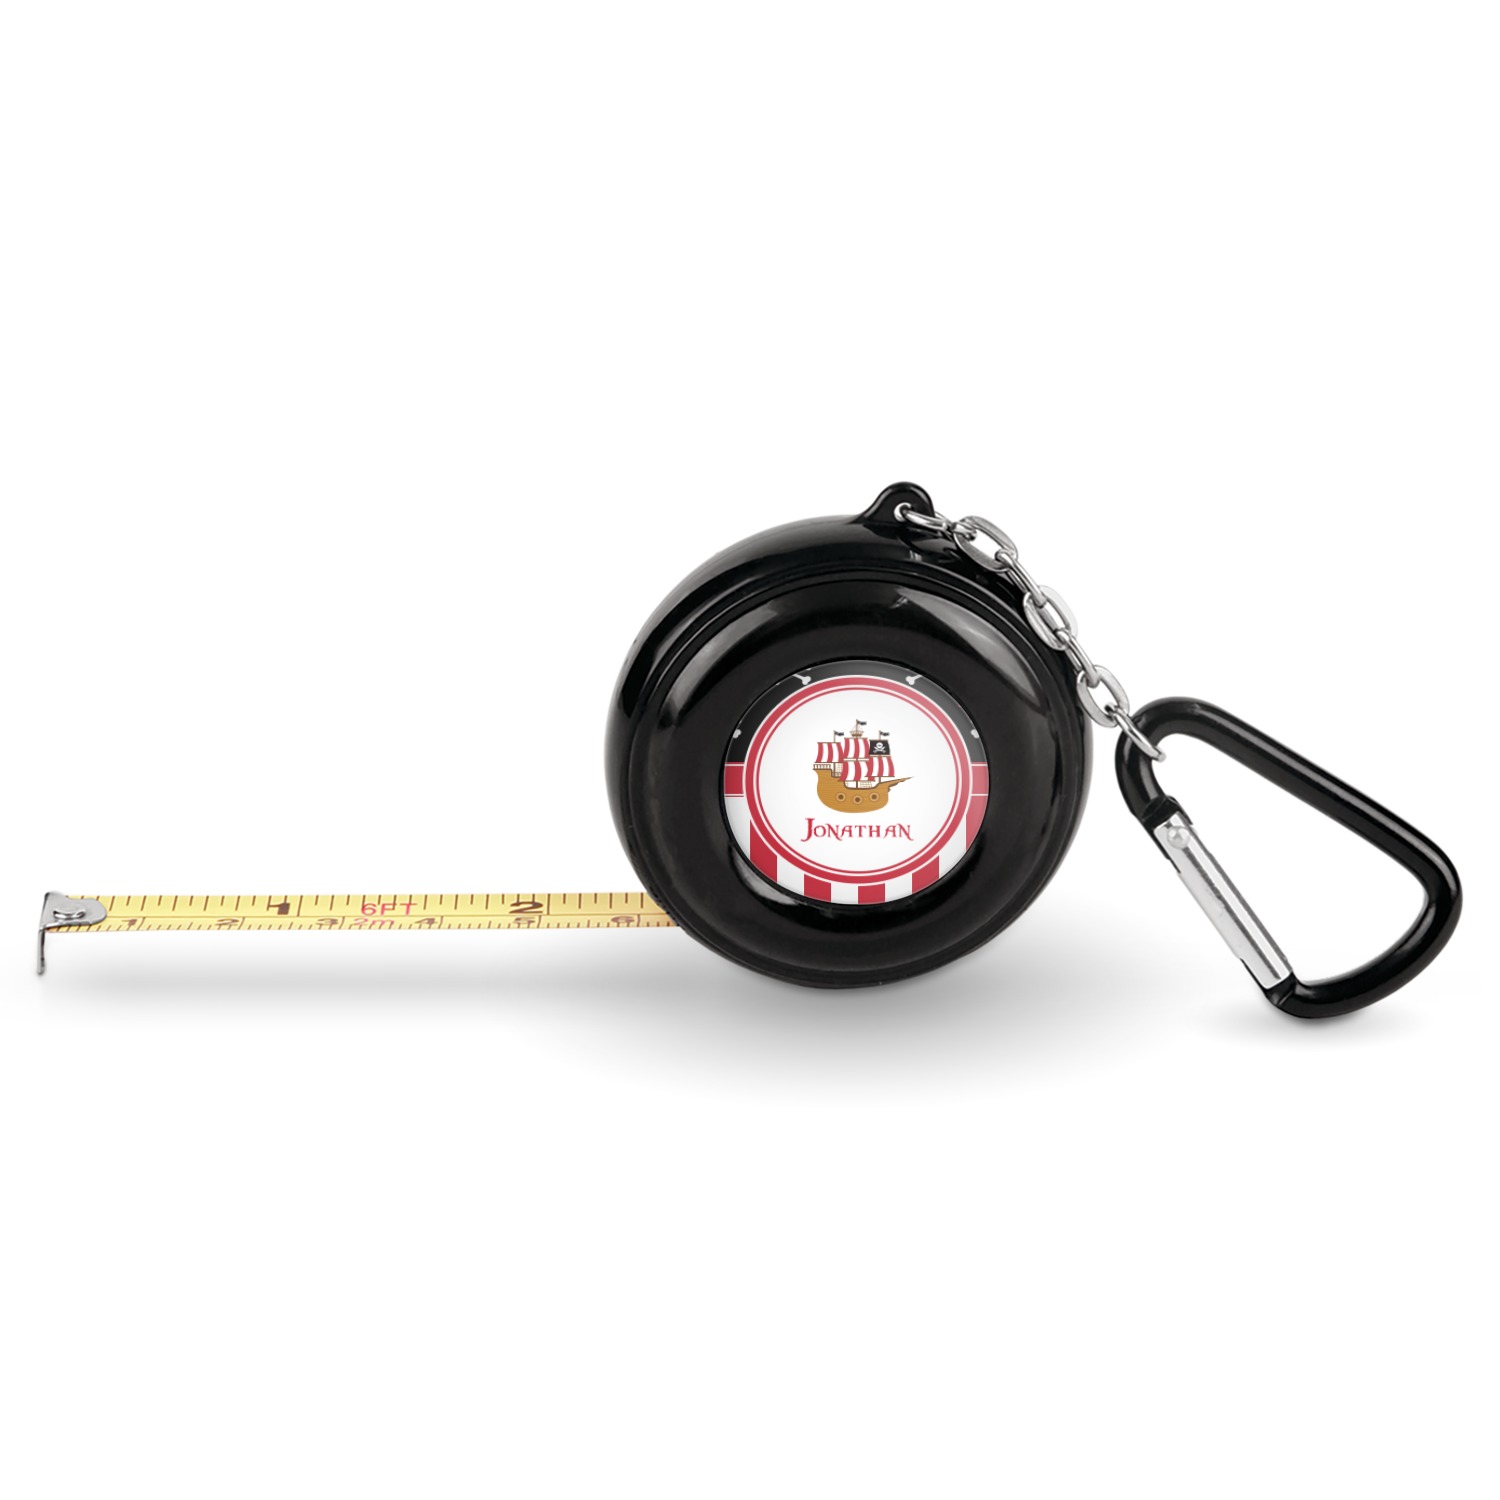 https://www.youcustomizeit.com/common/MAKE/40856/Pirate-Stripes-6-Ft-Pocket-Tape-Measure-with-Carabiner-Hook-Front.jpg?lm=1555223690